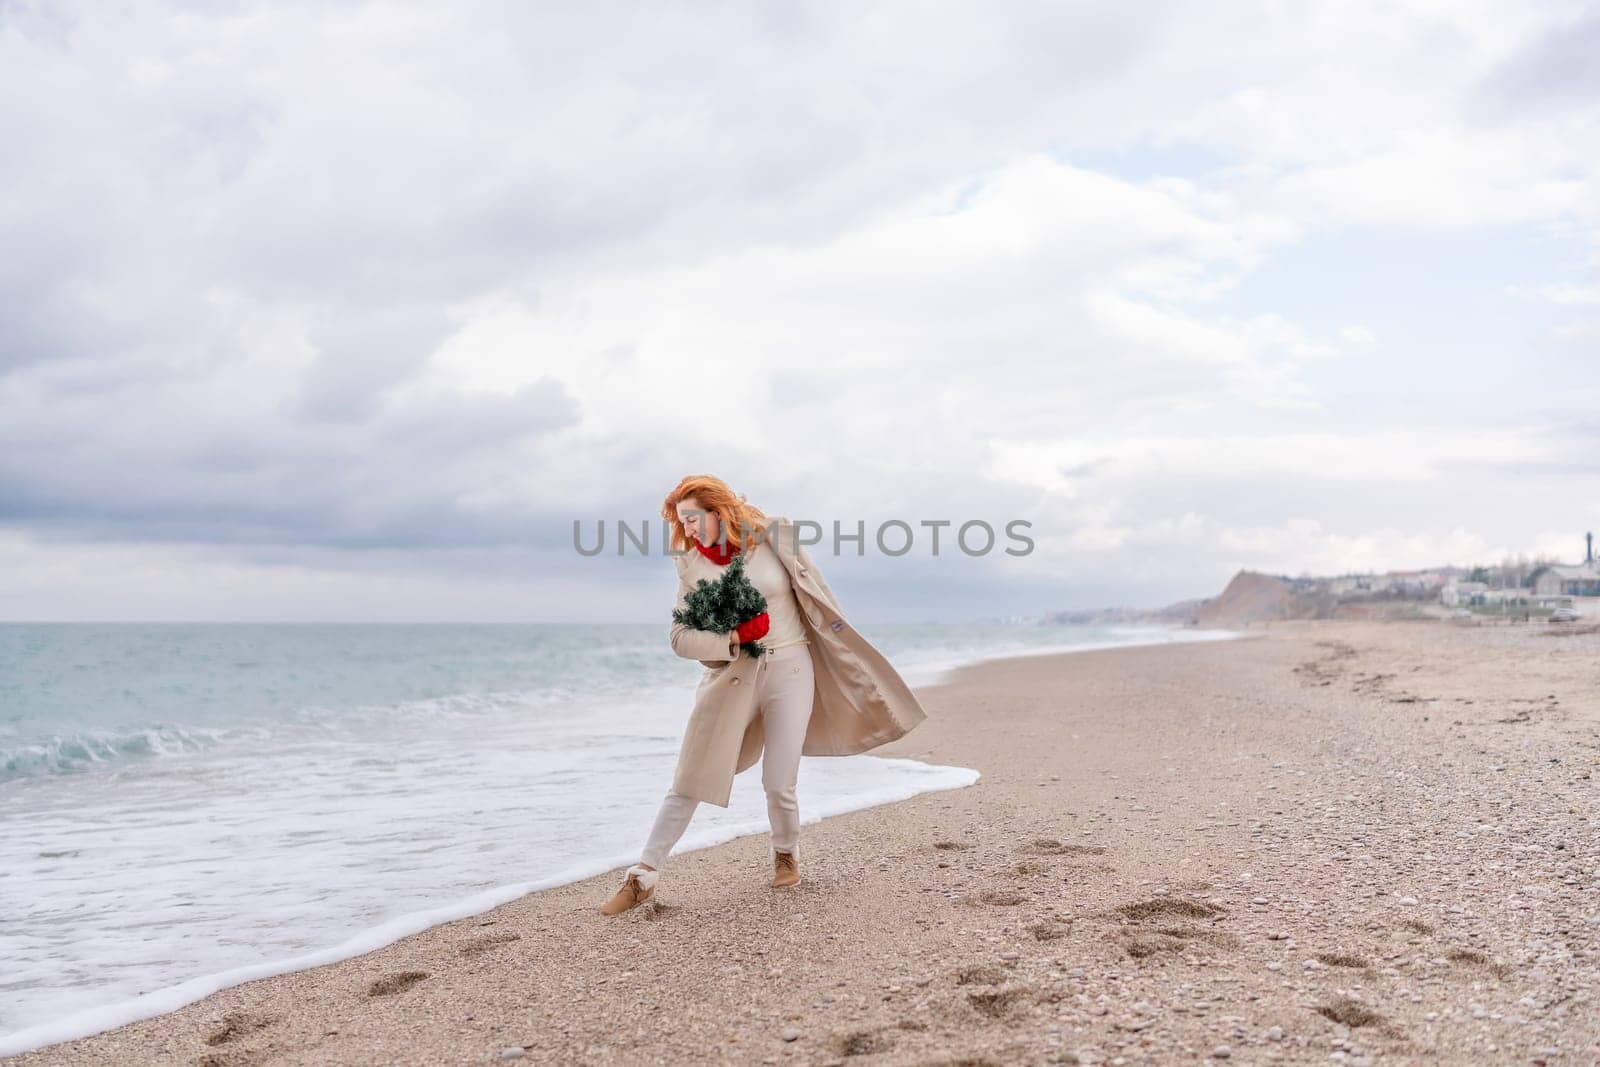 Redhead woman Christmas tree sea. Christmas portrait of a happy redhead woman walking along the beach and holding a Christmas tree in her hands. Dressed in a light coat, white suit and red mittens. by Matiunina